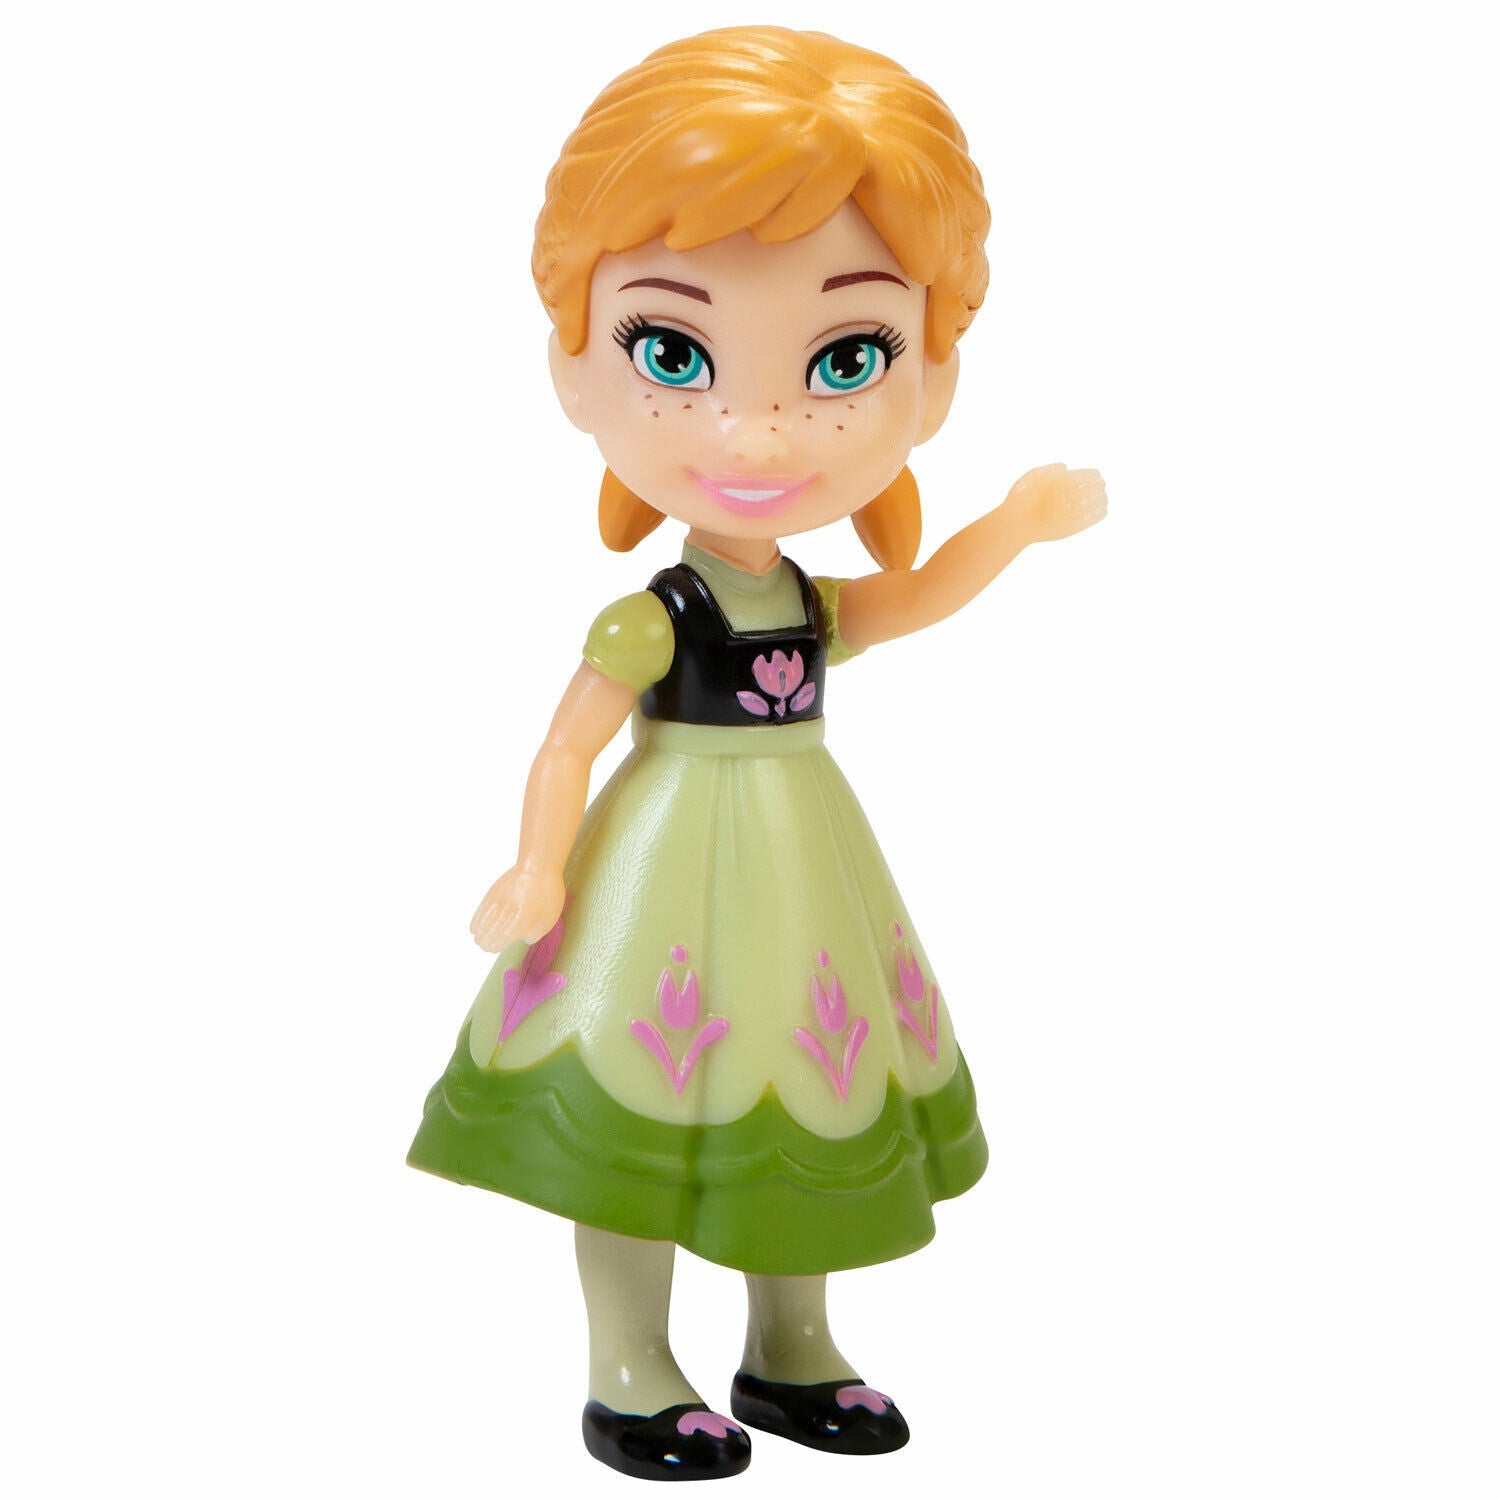 Disney Mini 3-Inch Toddler Dolls - Pick Your Favorite! - Young Anna (Frozen 2)